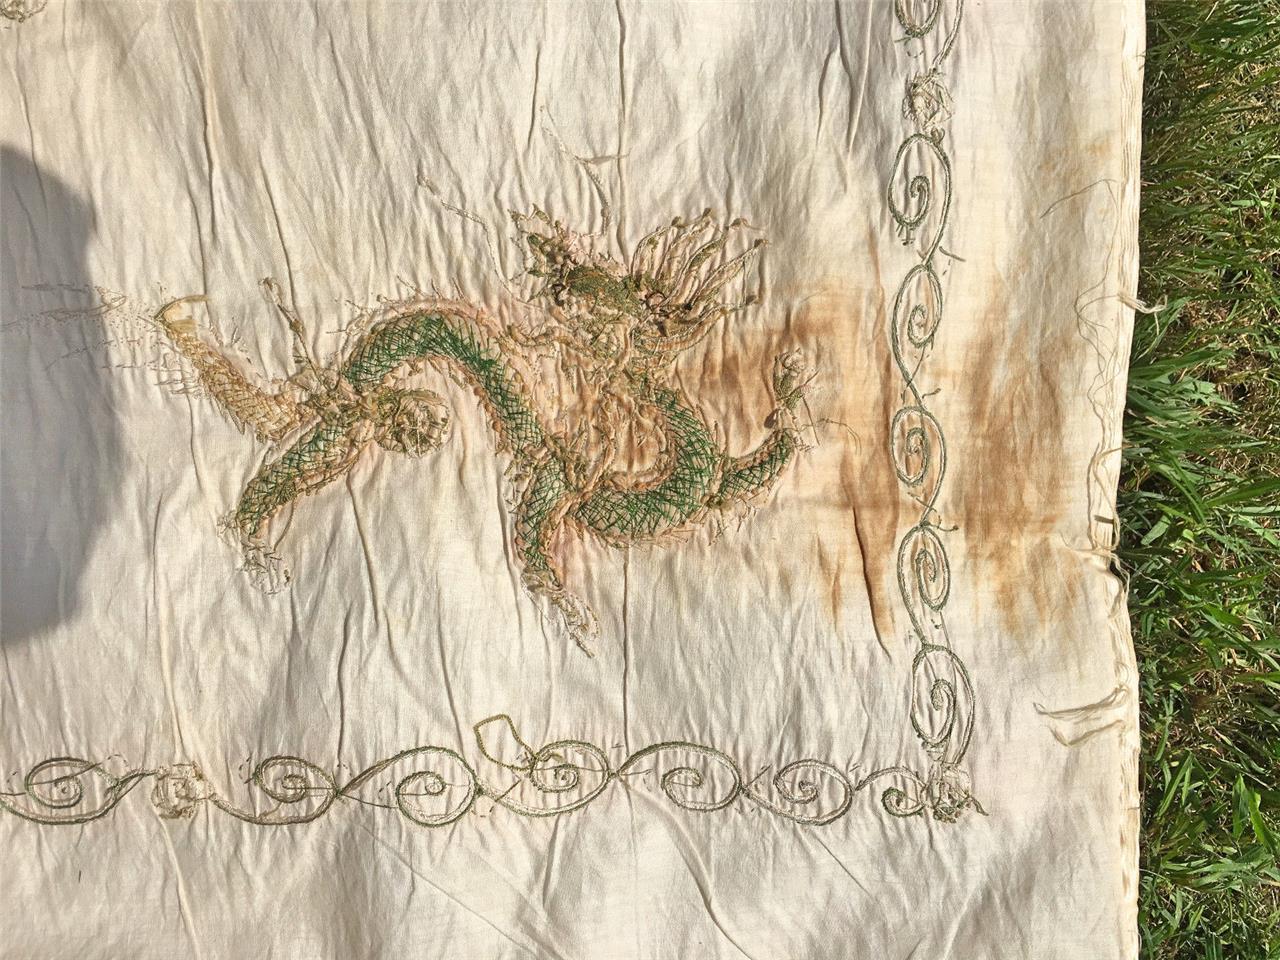 A Fine Antique Chinese Silk Embroidered Wall Hanging of Dragons